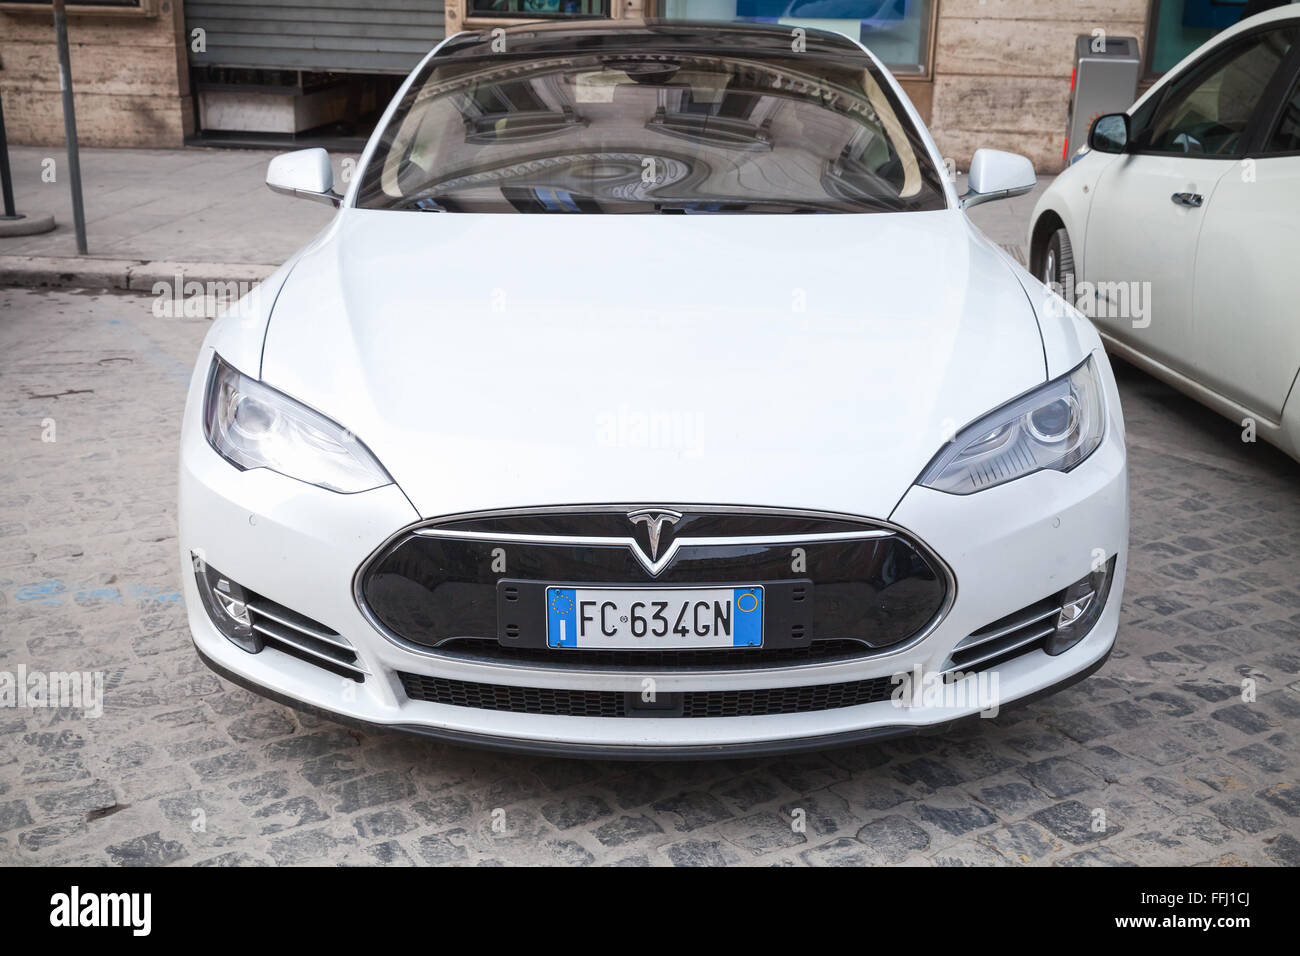 Rome, Italy - February 13, 2016 : White Tesla model S car parked on urban roadside in Rome, front view, close-up photo Stock Photo